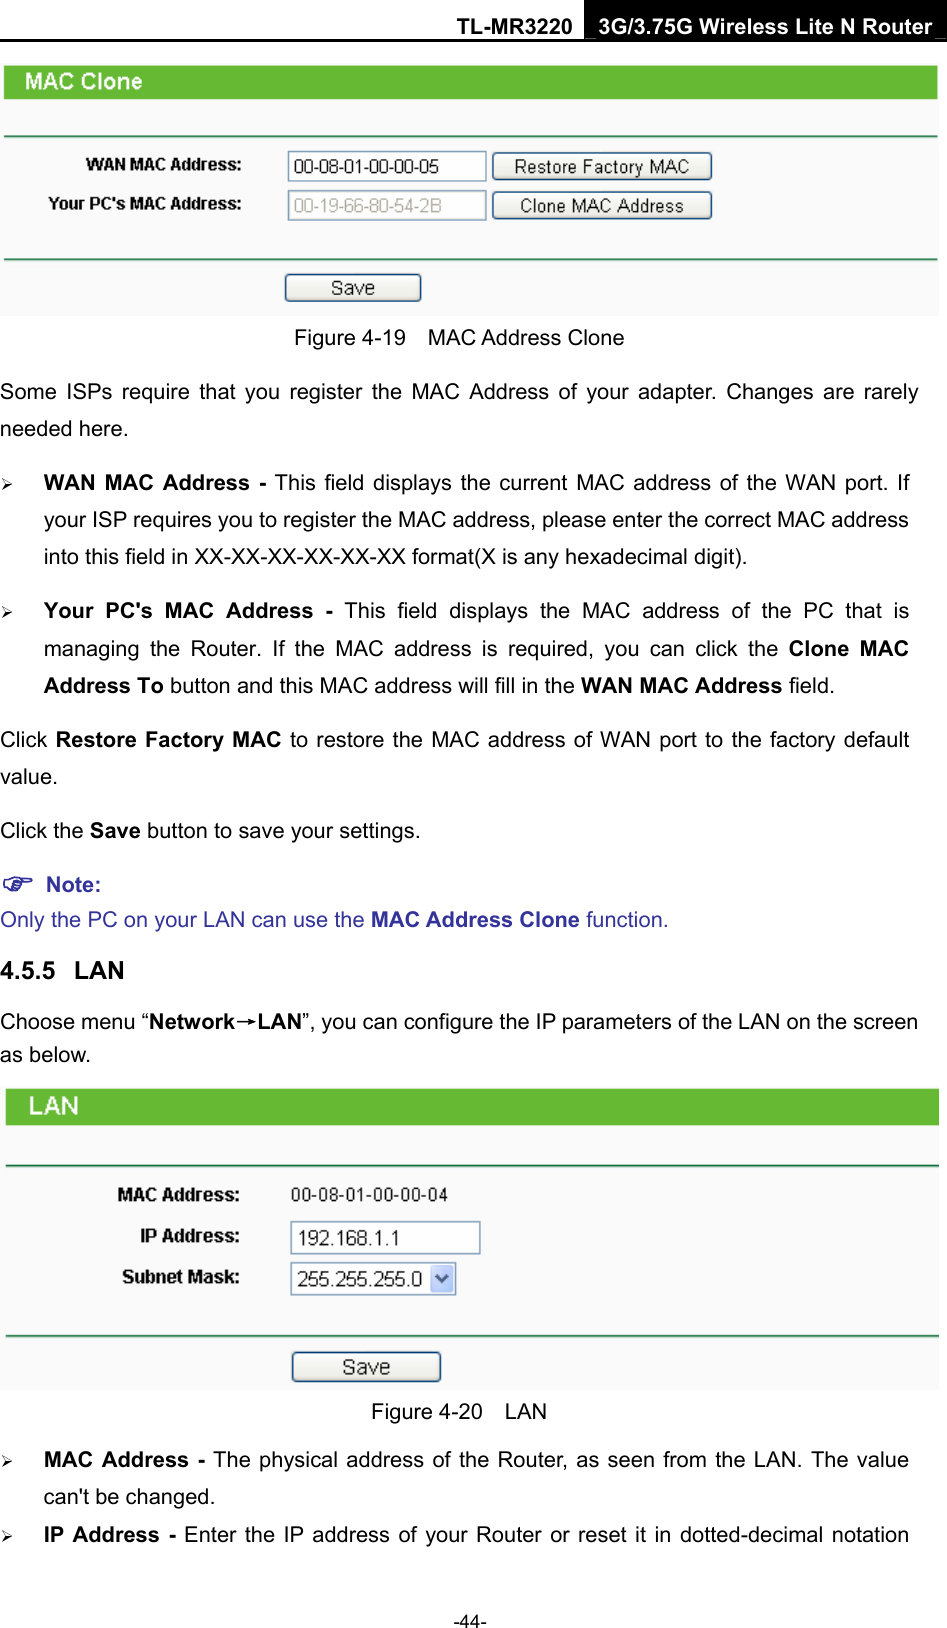 TL-MR3220 3G/3.75G Wireless Lite N Router -44-  Figure 4-19  MAC Address Clone Some ISPs require that you register the MAC Address of your adapter. Changes are rarely needed here. ¾ WAN MAC Address - This field displays the current MAC address of the WAN port. If your ISP requires you to register the MAC address, please enter the correct MAC address into this field in XX-XX-XX-XX-XX-XX format(X is any hexadecimal digit).   ¾ Your PC&apos;s MAC Address - This field displays the MAC address of the PC that is managing the Router. If the MAC address is required, you can click the Clone MAC Address To button and this MAC address will fill in the WAN MAC Address field. Click Restore Factory MAC to restore the MAC address of WAN port to the factory default value. Click the Save button to save your settings. ) Note:  Only the PC on your LAN can use the MAC Address Clone function. 4.5.5  LAN Choose menu “Network→LAN”, you can configure the IP parameters of the LAN on the screen as below.  Figure 4-20  LAN ¾ MAC Address - The physical address of the Router, as seen from the LAN. The value can&apos;t be changed. ¾ IP Address - Enter the IP address of your Router or reset it in dotted-decimal notation 